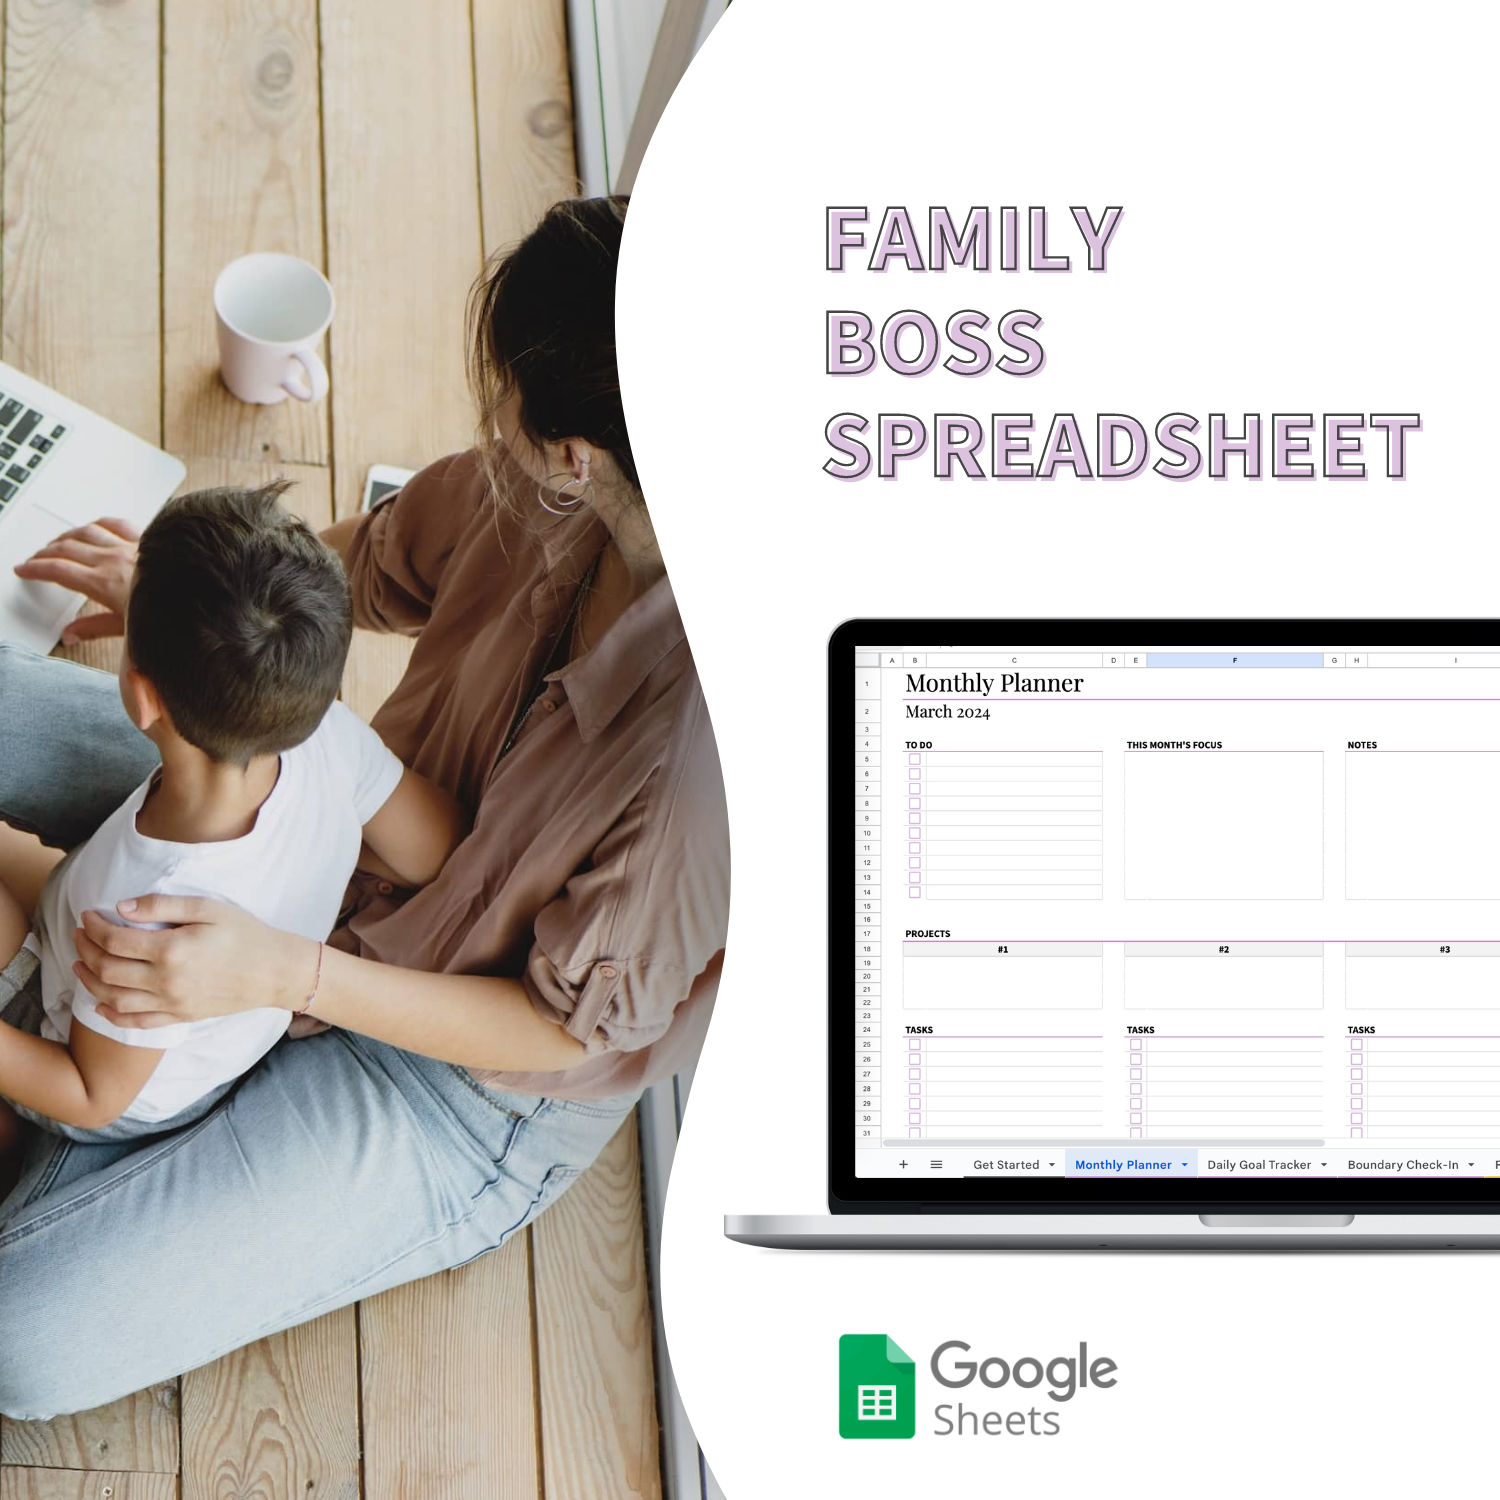 Family Boss Spreadsheet is the BEST home management spreadsheet for everything you need to manage your own home.